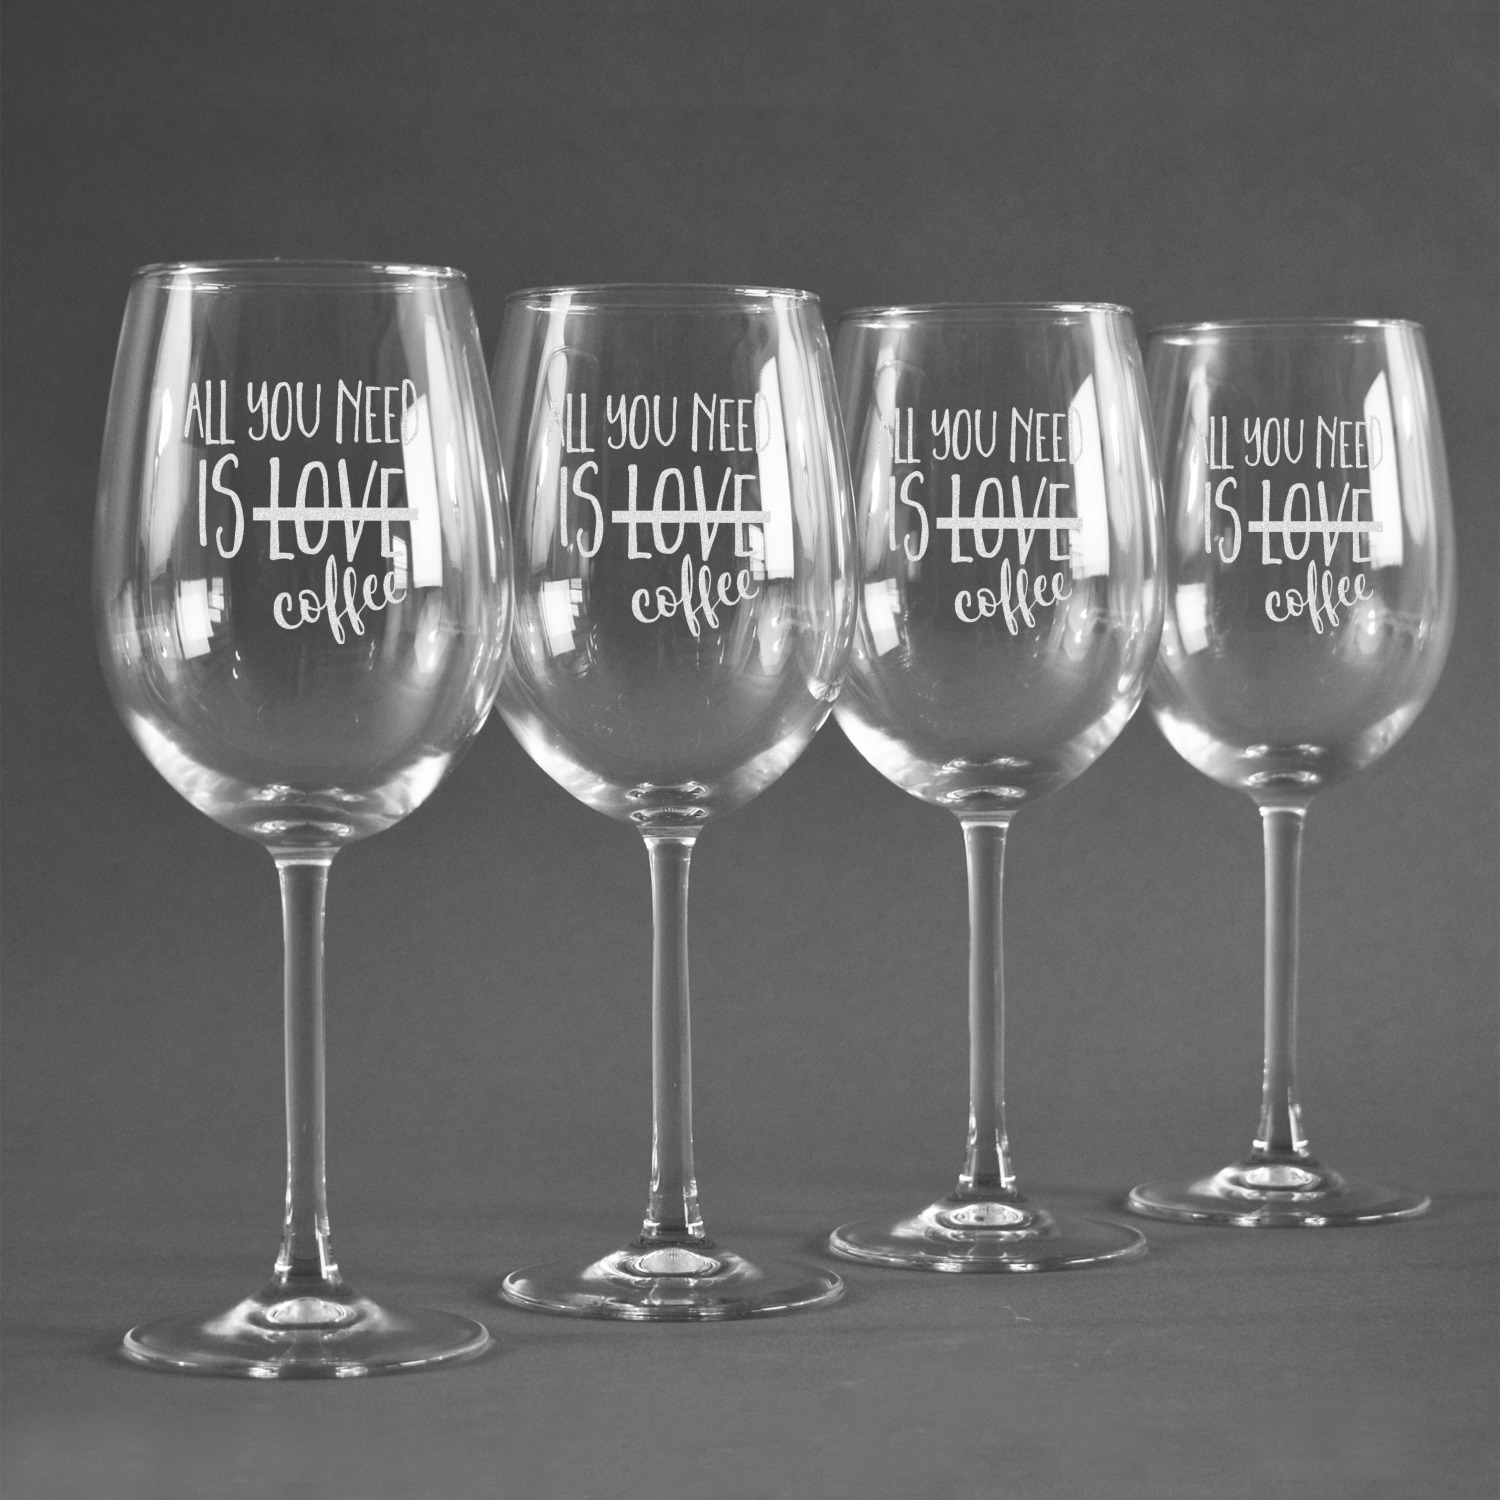 https://www.youcustomizeit.com/common/MAKE/906415/Coffee-Lover-Personalized-Wine-Glasses-Set-of-4.jpg?lm=1682545750